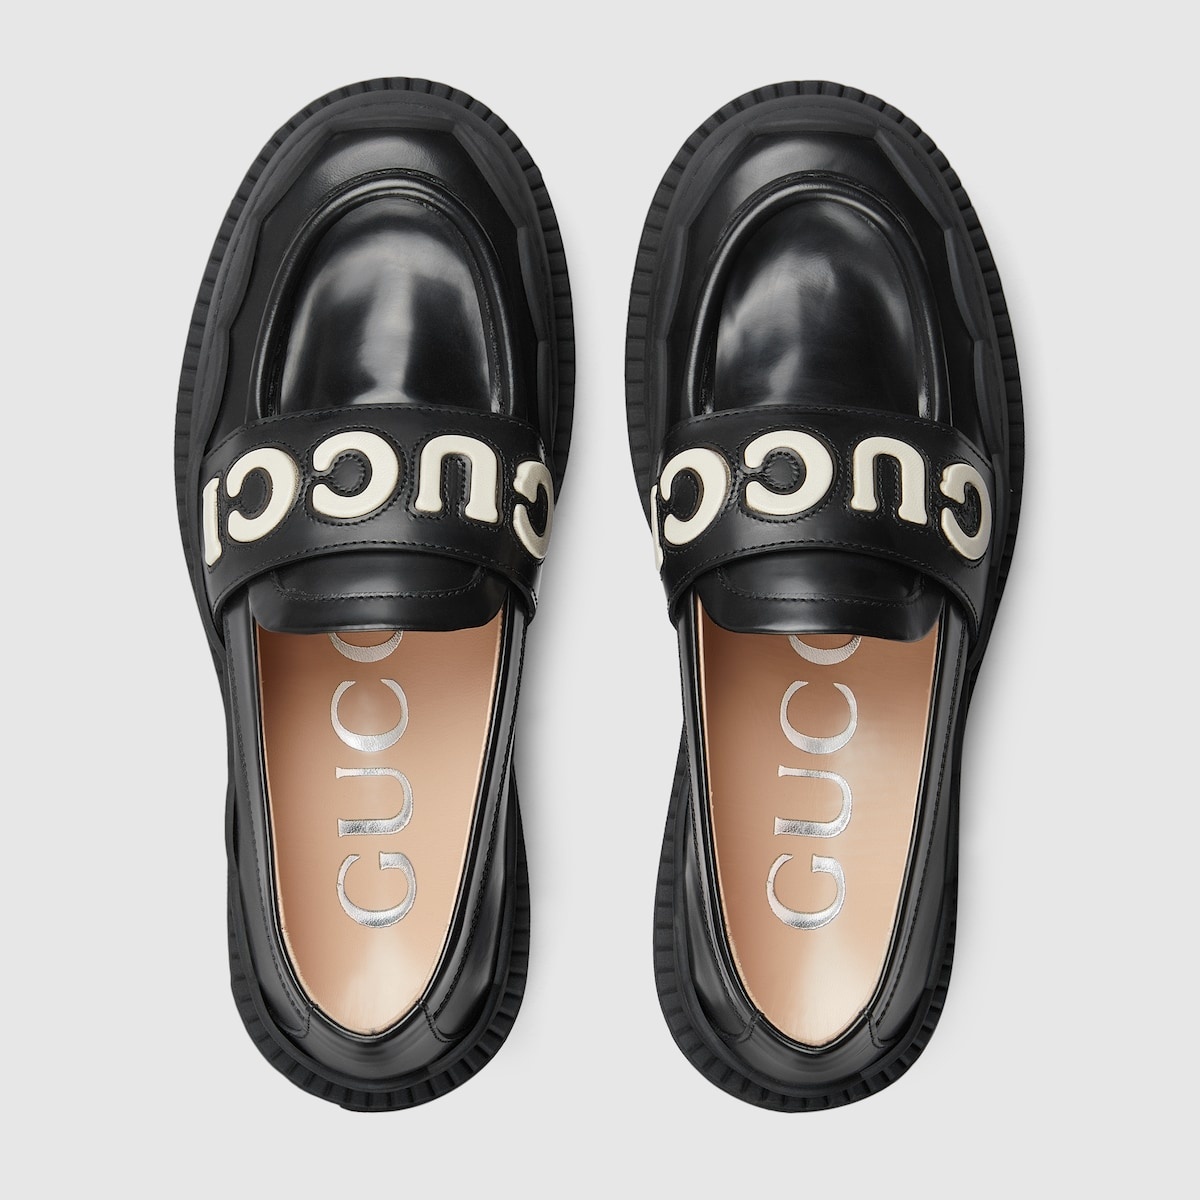 Women's Gucci loafer - 5